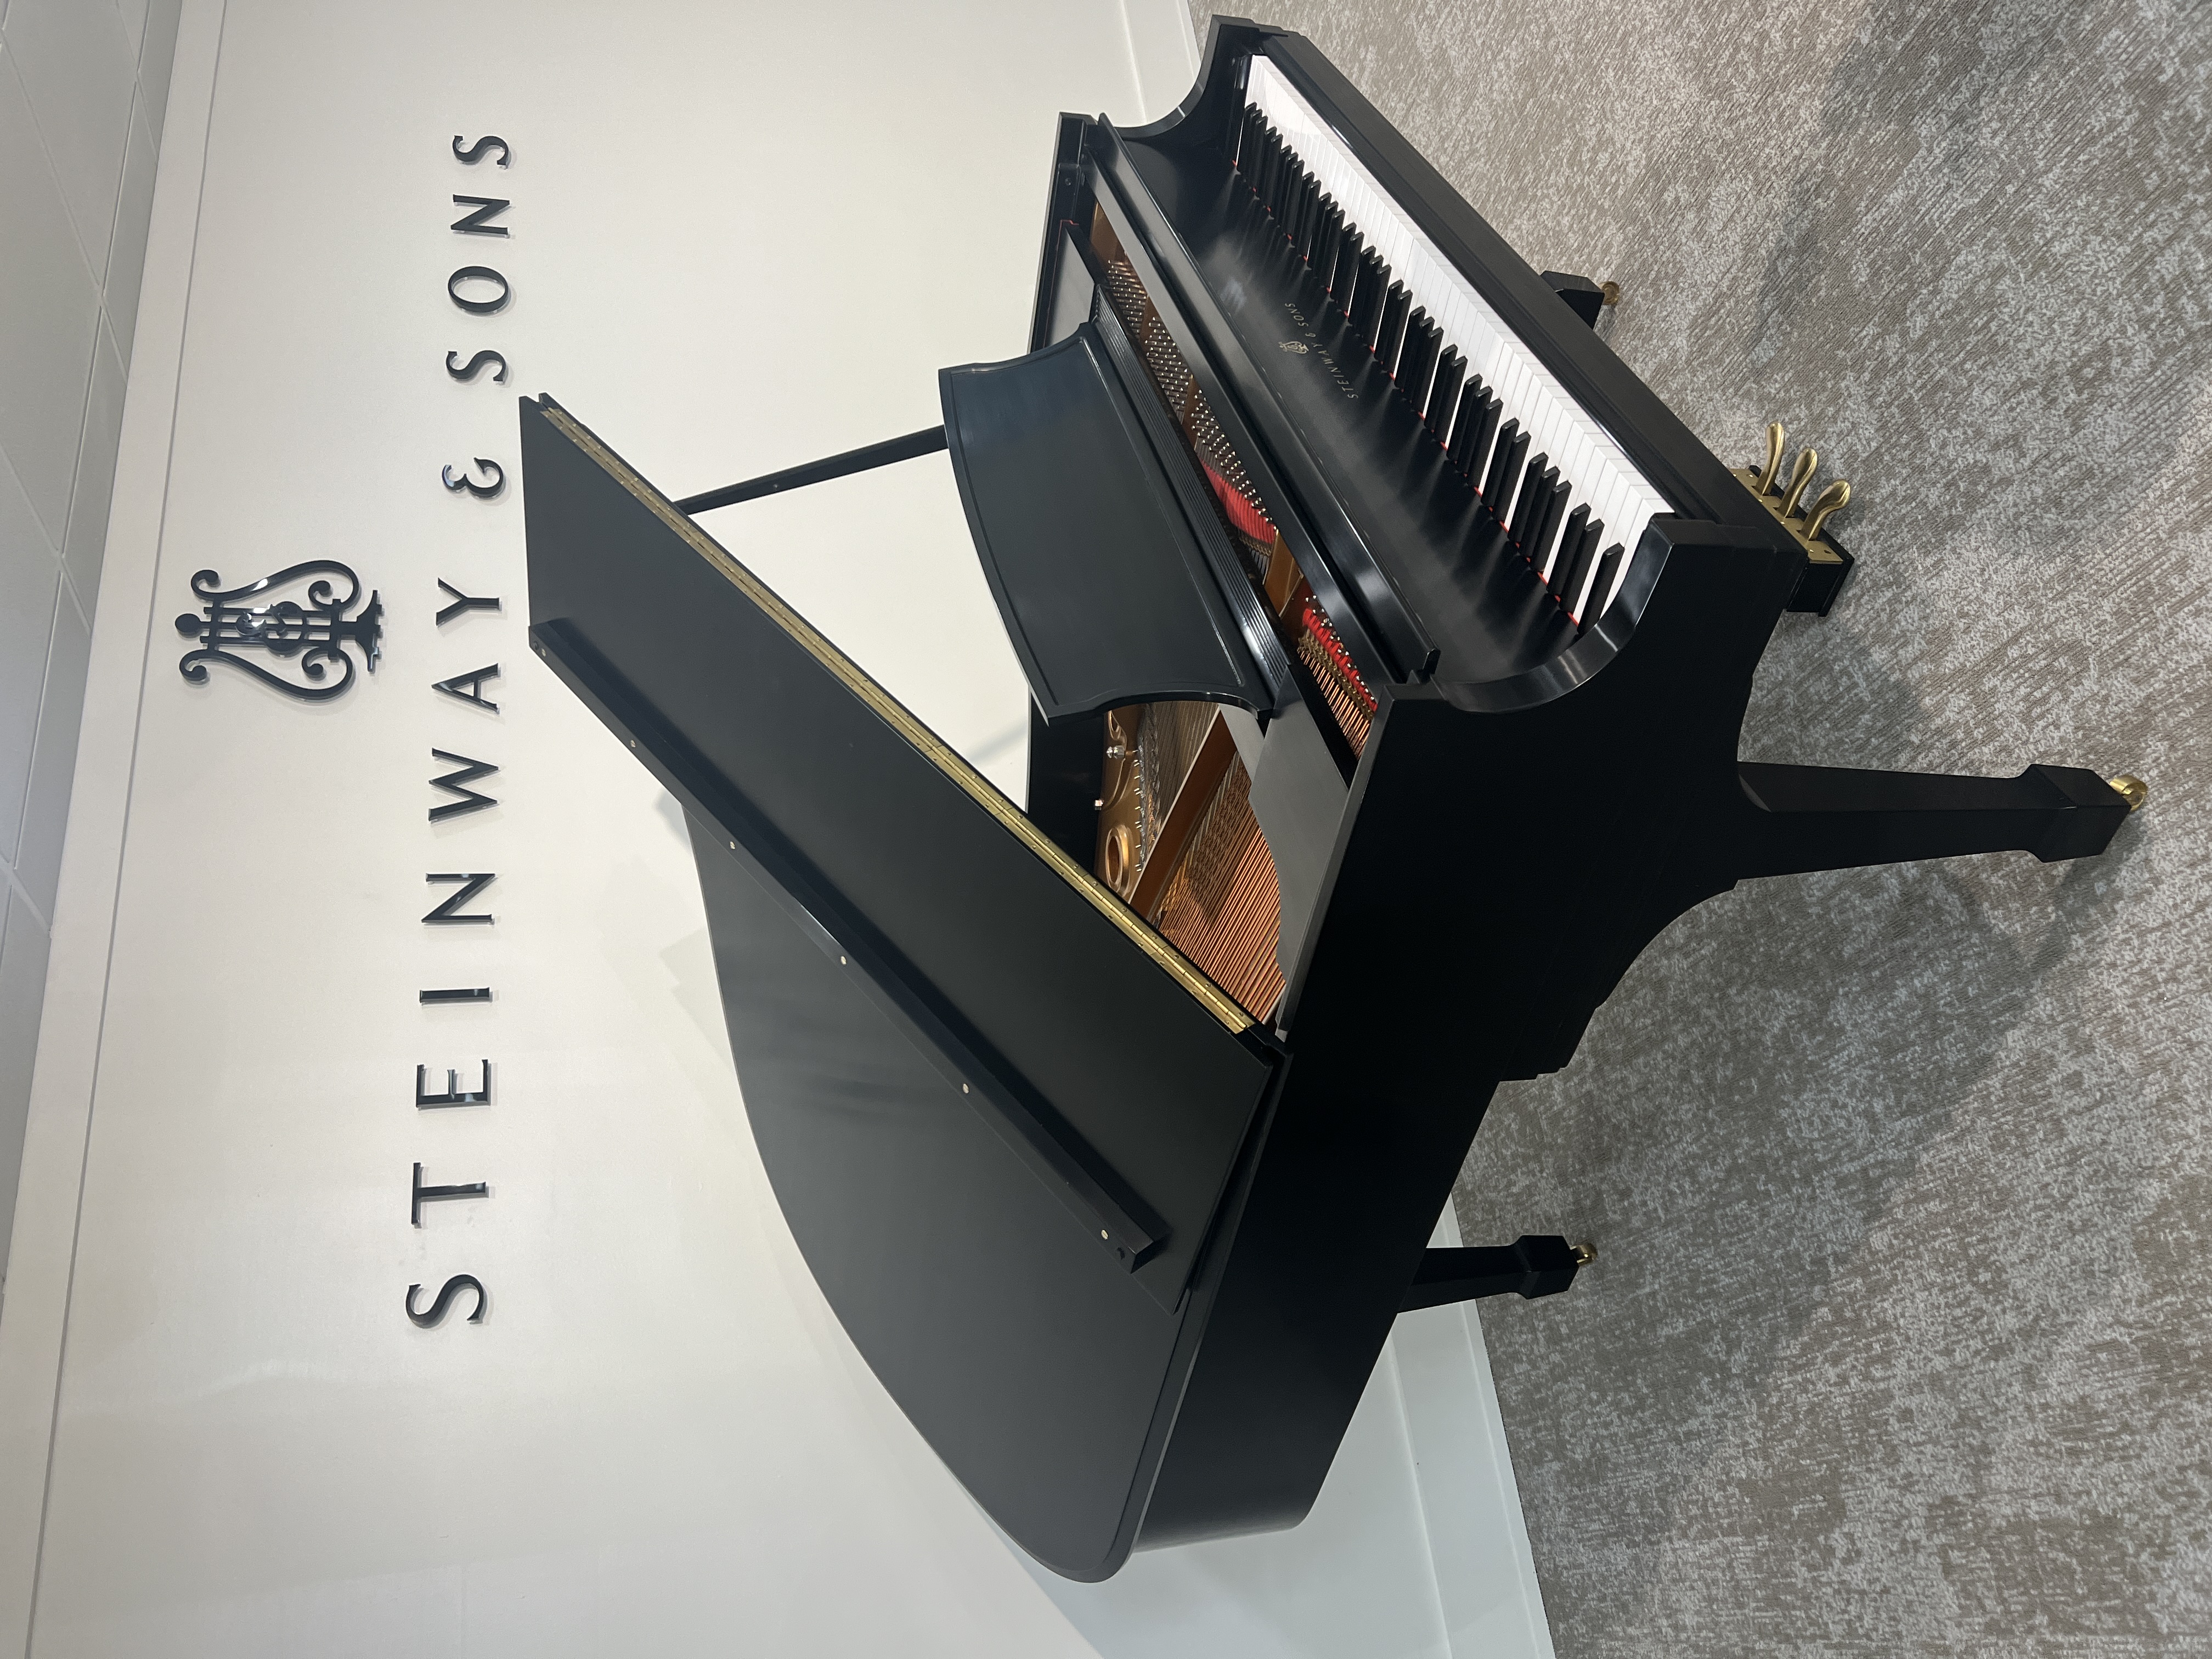 STEINWAY & SONS MODEL L GRAND PIANO